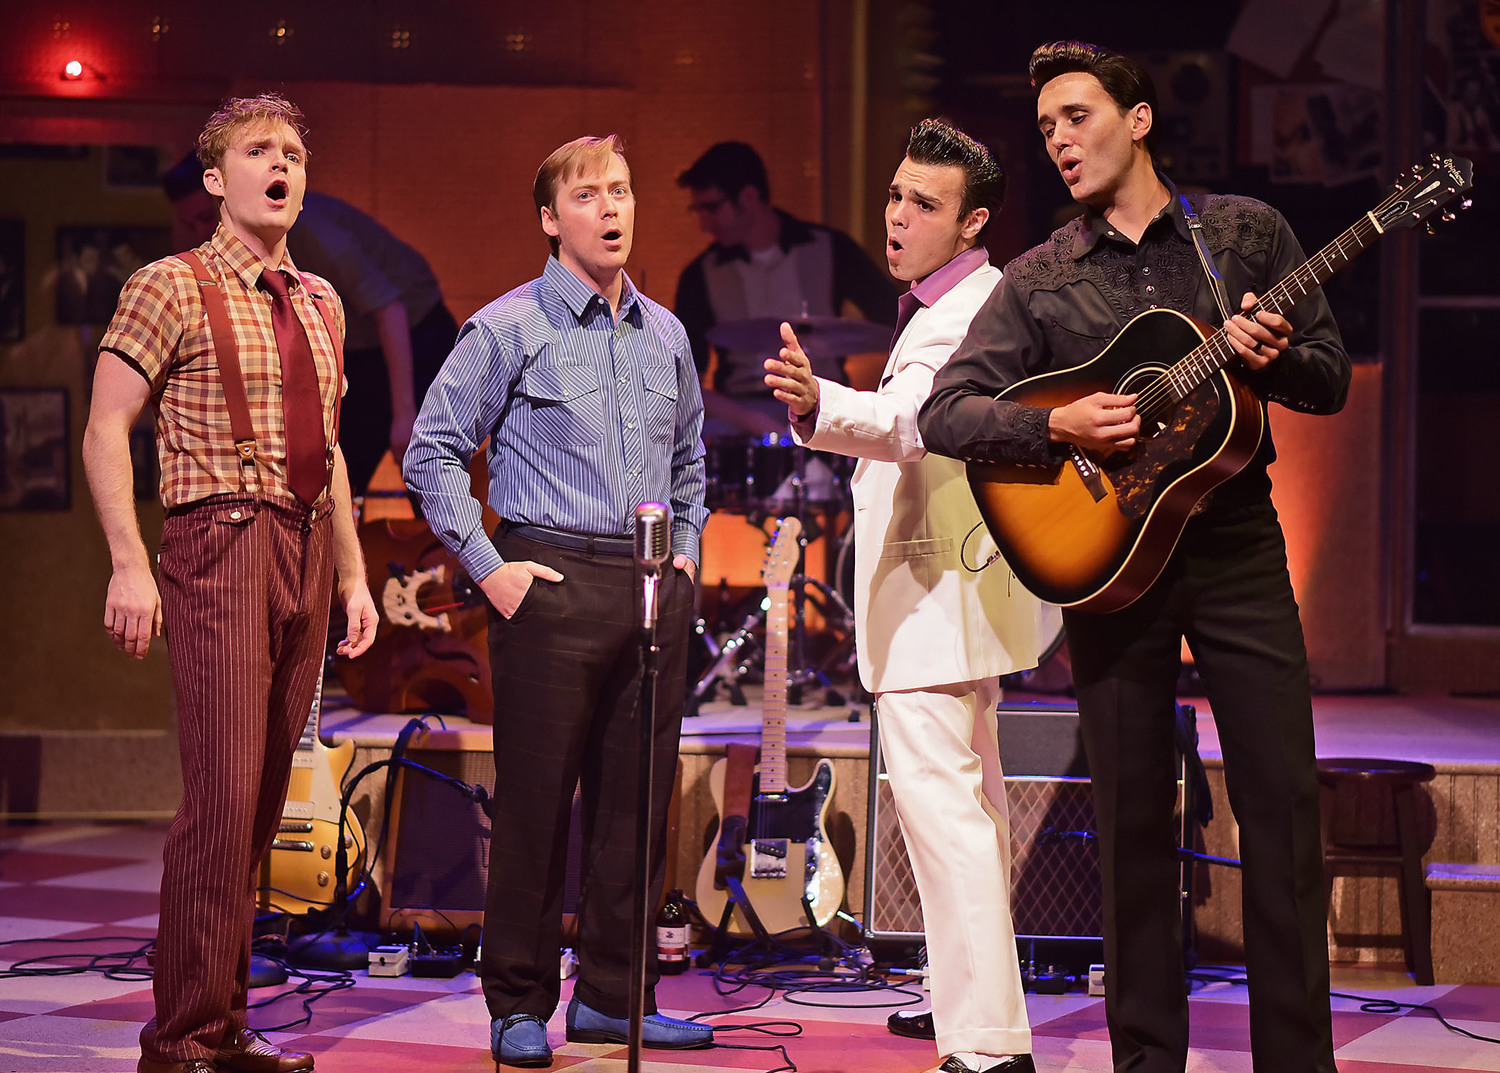 Review: MILLION DOLLAR QUARTET Brings History to Life at Beef & Boards Dinner Theatre 